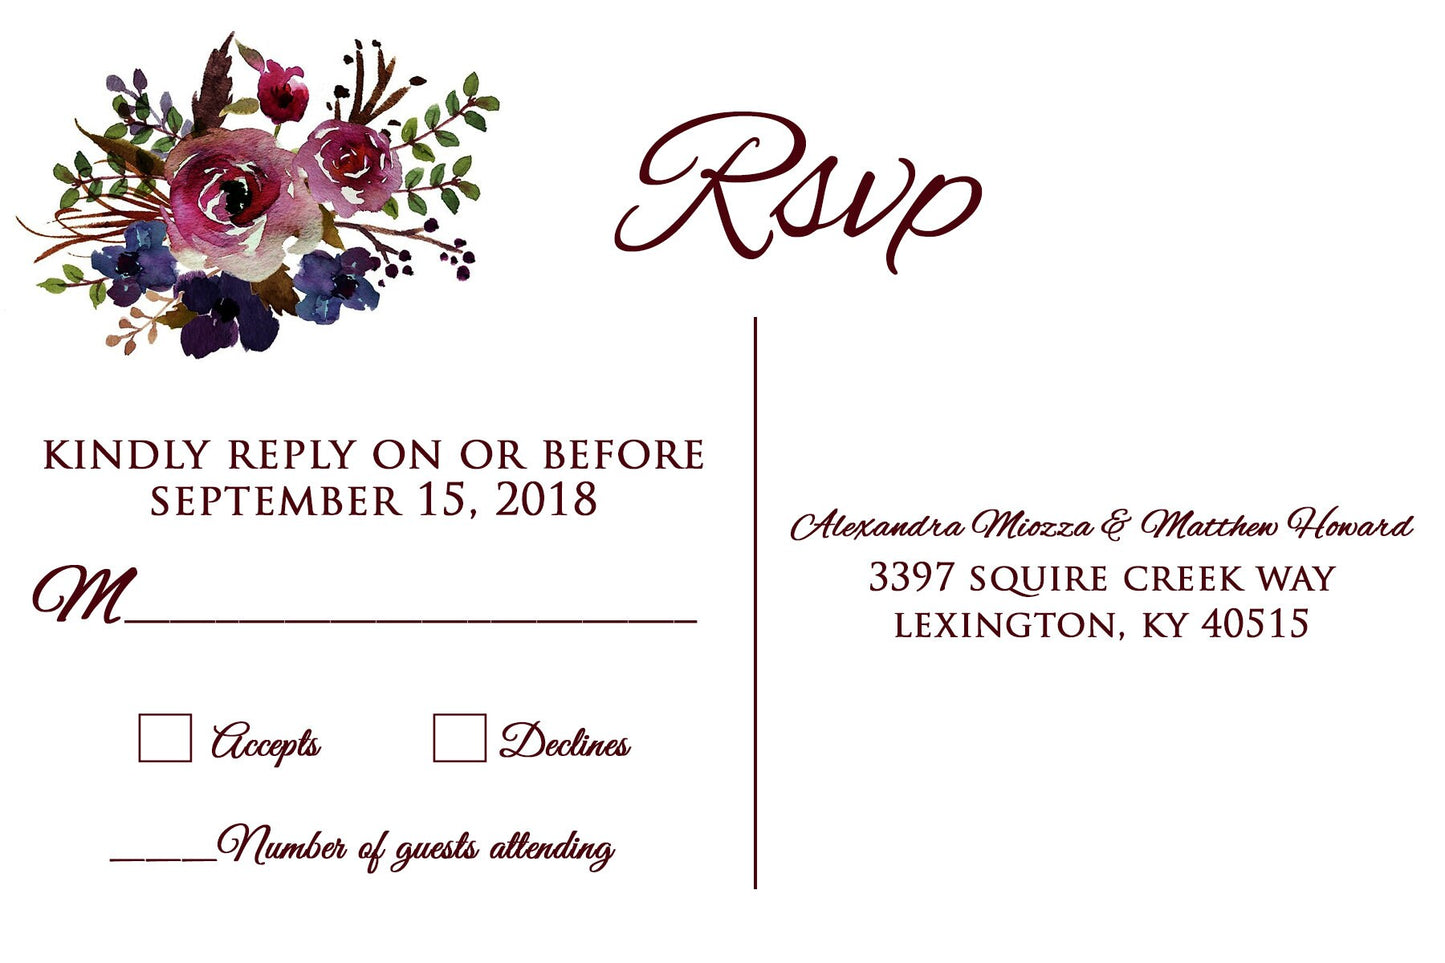 Burgundy Watercolor Wedding invitations with RSVP, Burgundy and navy, Fall Wedding Invitations, Kraft Wedding invitations, Burgundy invite